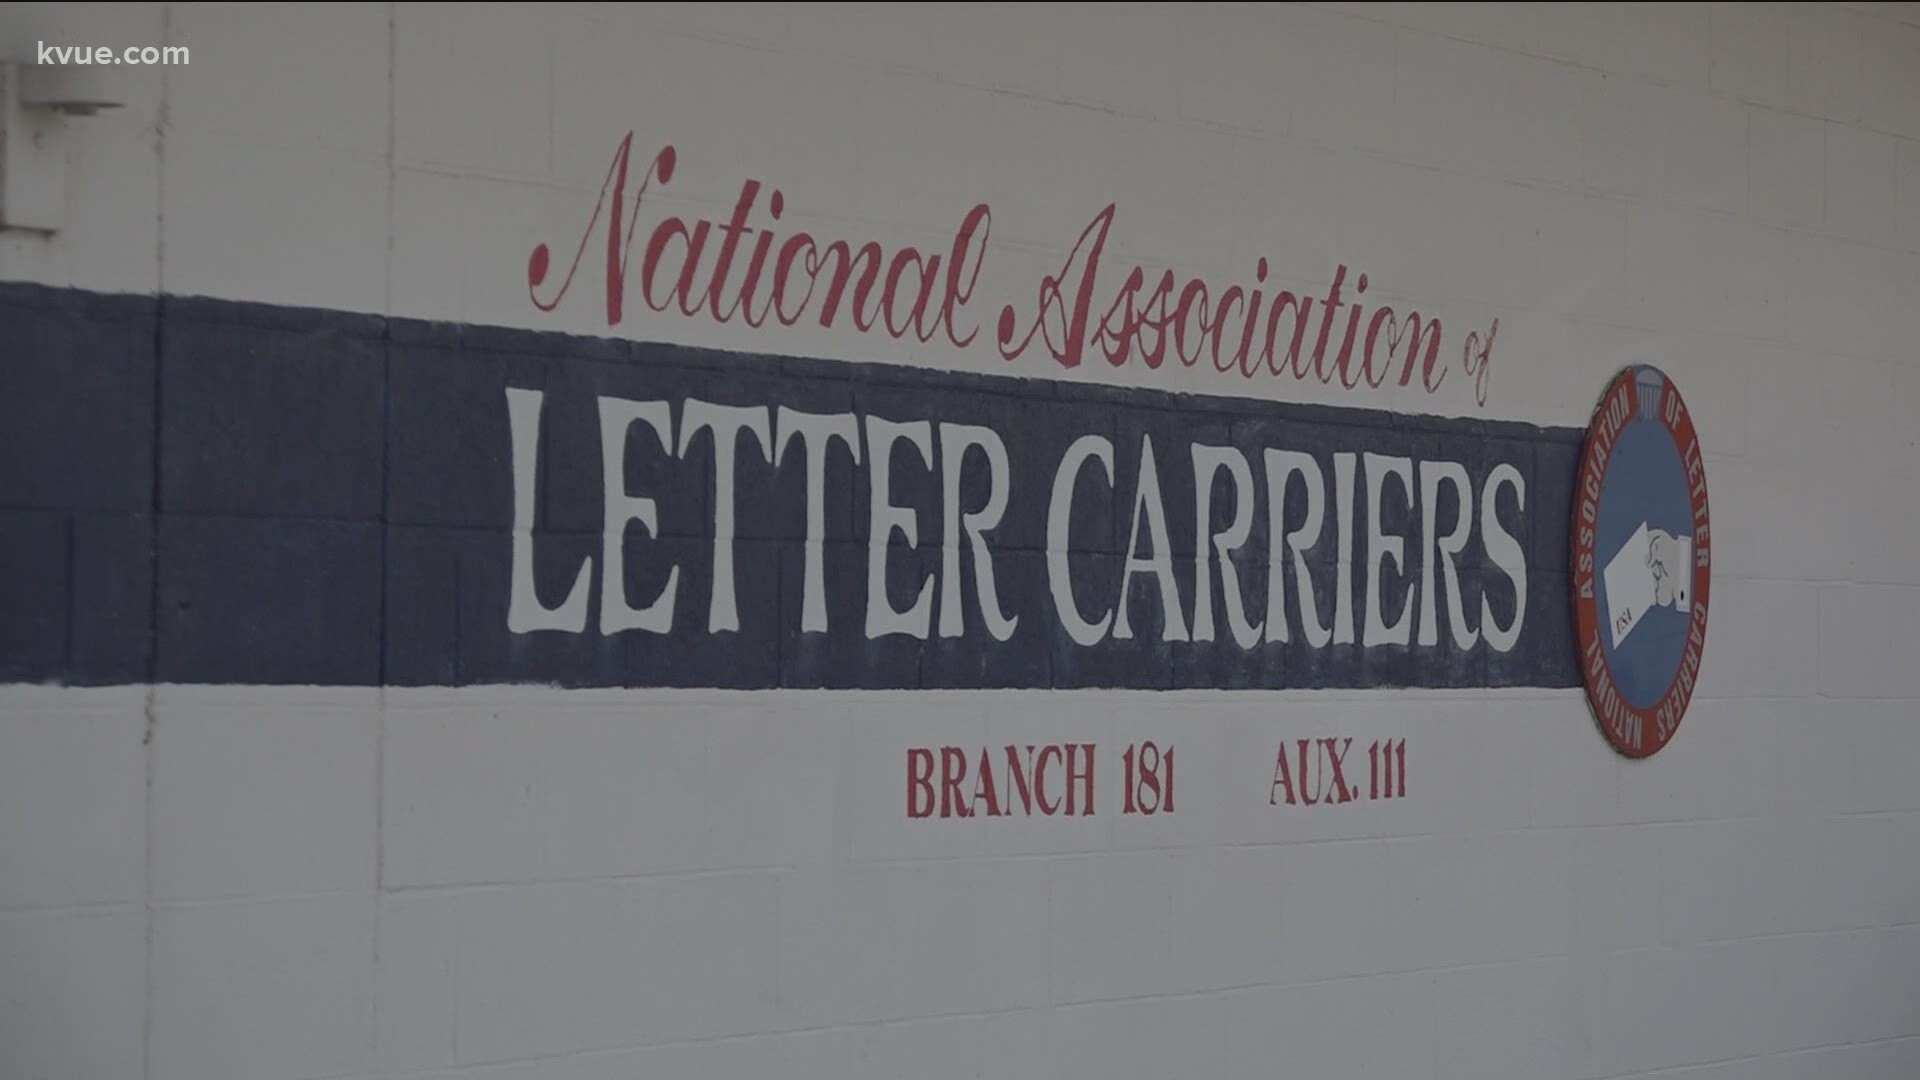 KVUE's Mike Marut spoke to the leader of the local letter carriers union.